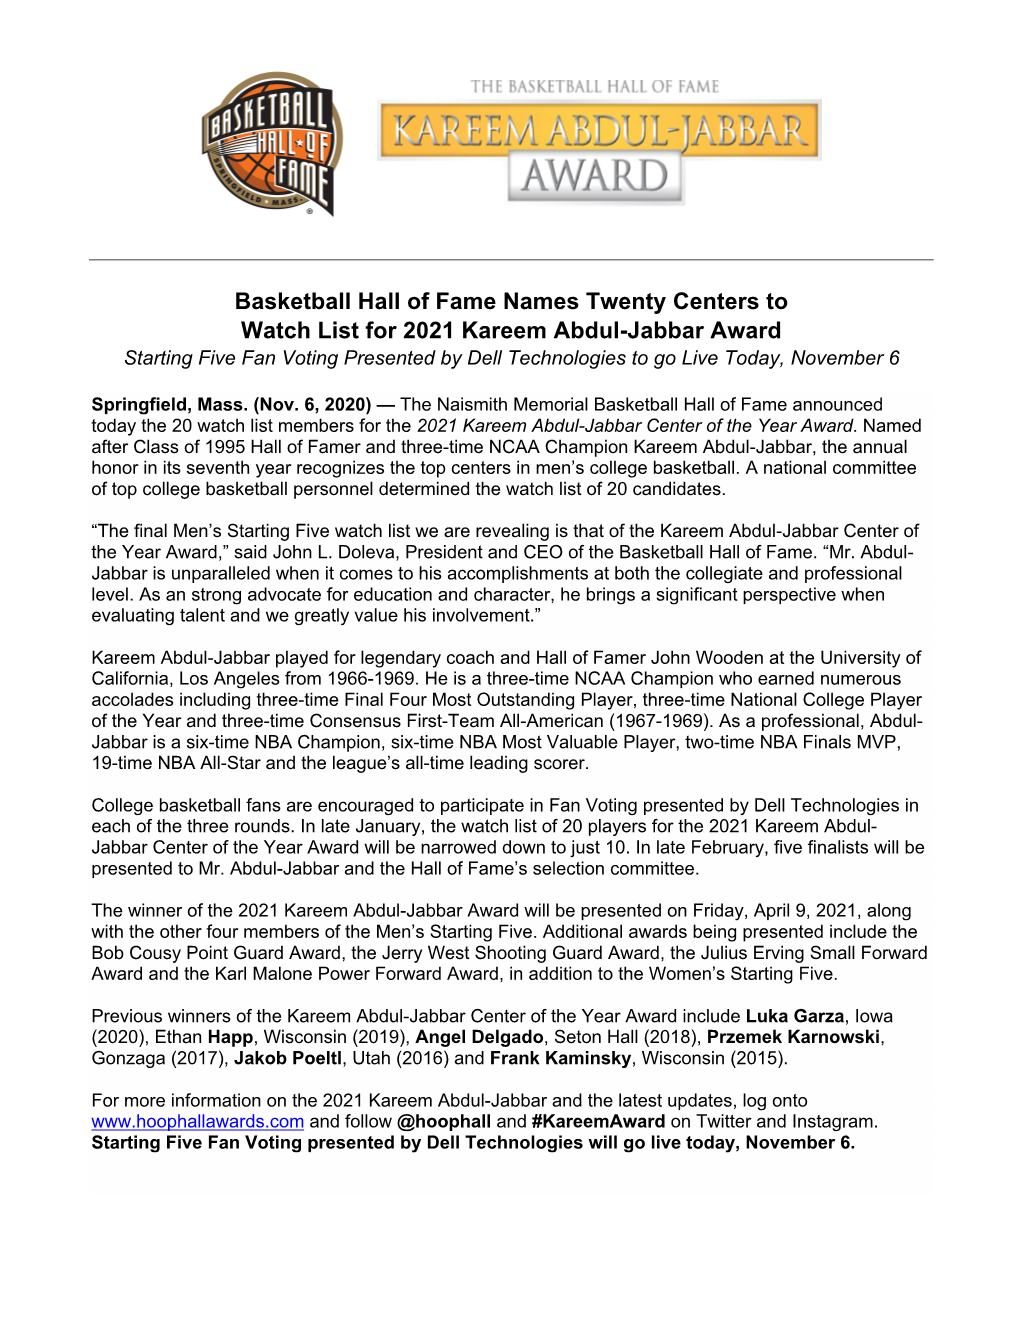 Basketball Hall of Fame Names Twenty Centers to Watch List For